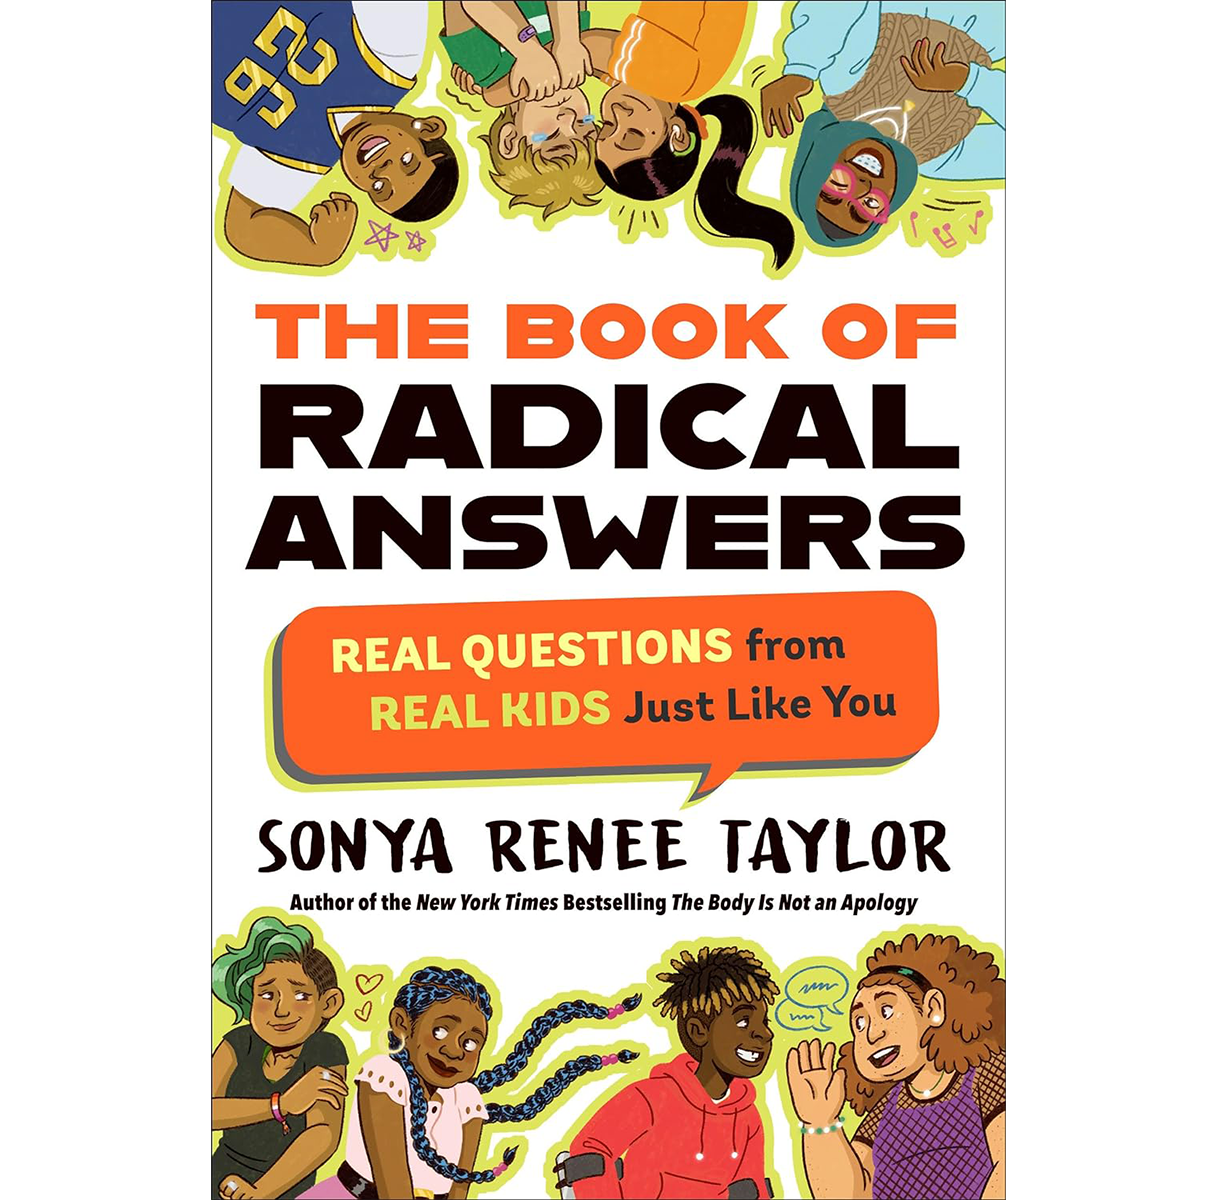 The Book of Radical Answers